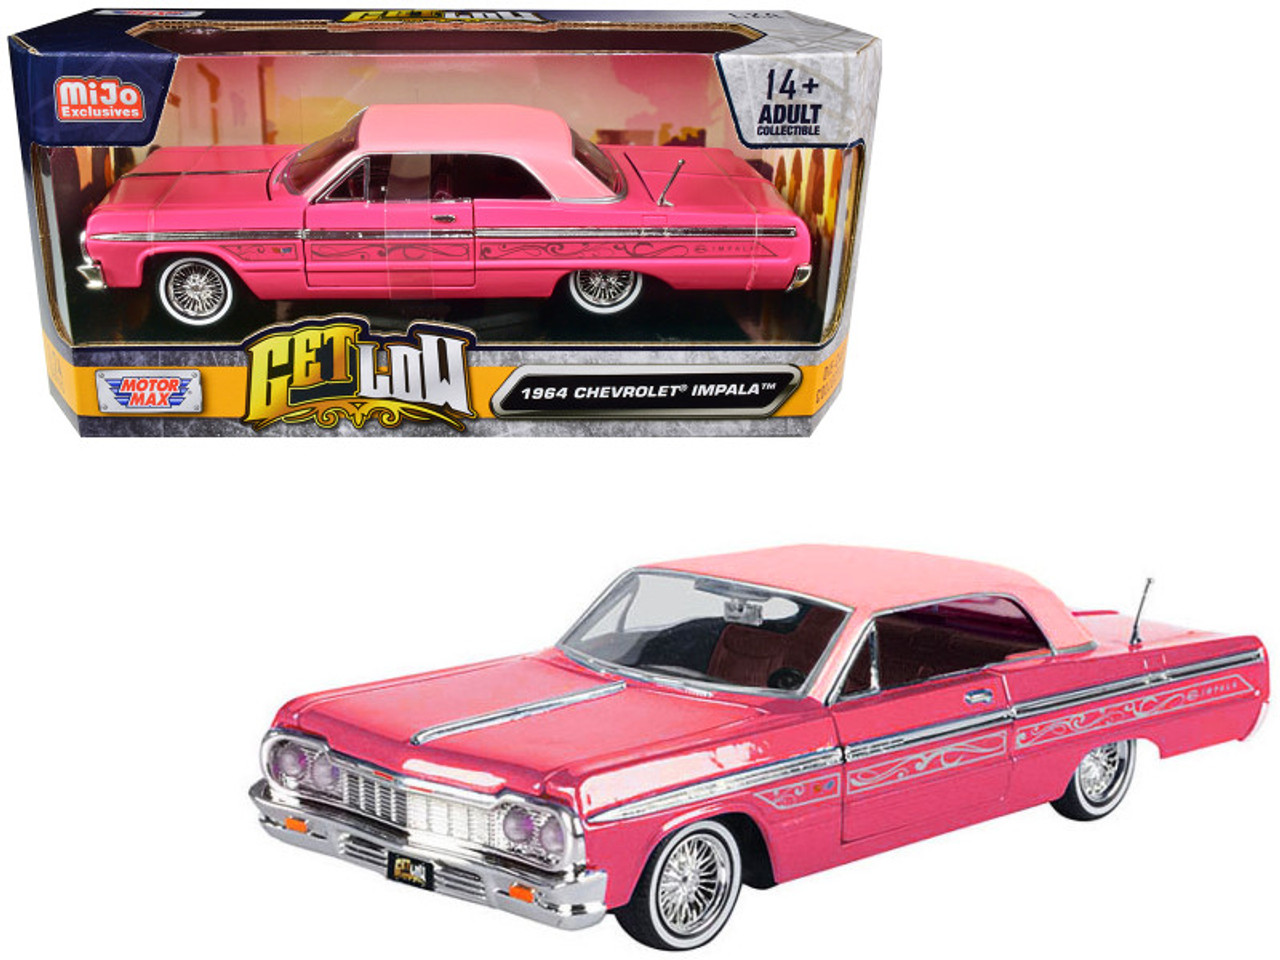 1964 Chevrolet Impala Lowrider Hard Top Pink with Graphics and Light Pink Top "Get Low" Series 1/24 Diecast Model Car by Motormax